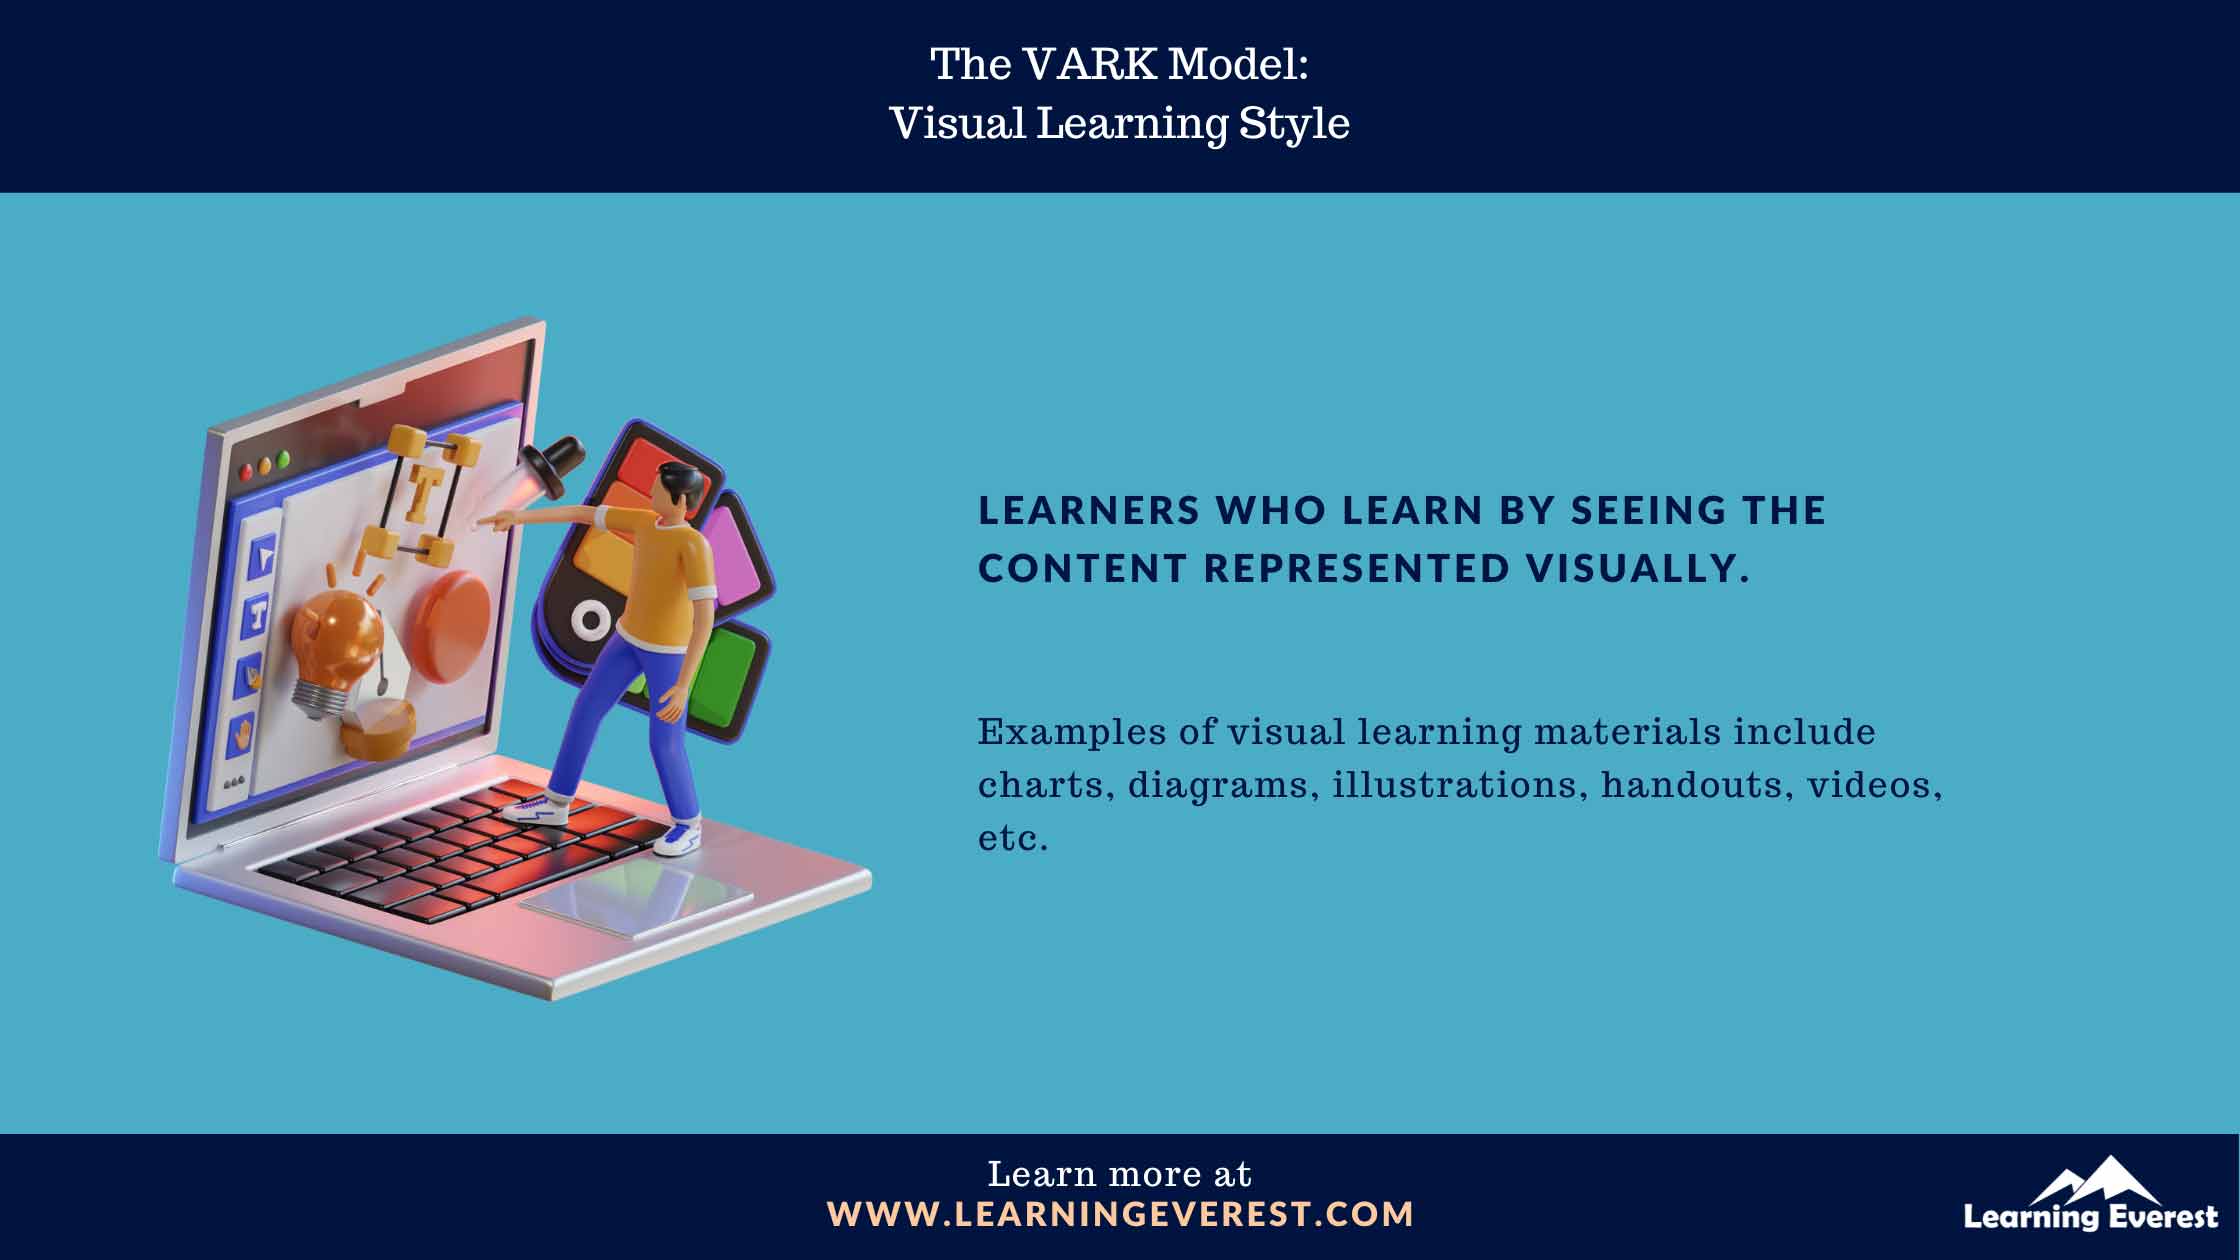 The VARK Model - Visual Learning Style